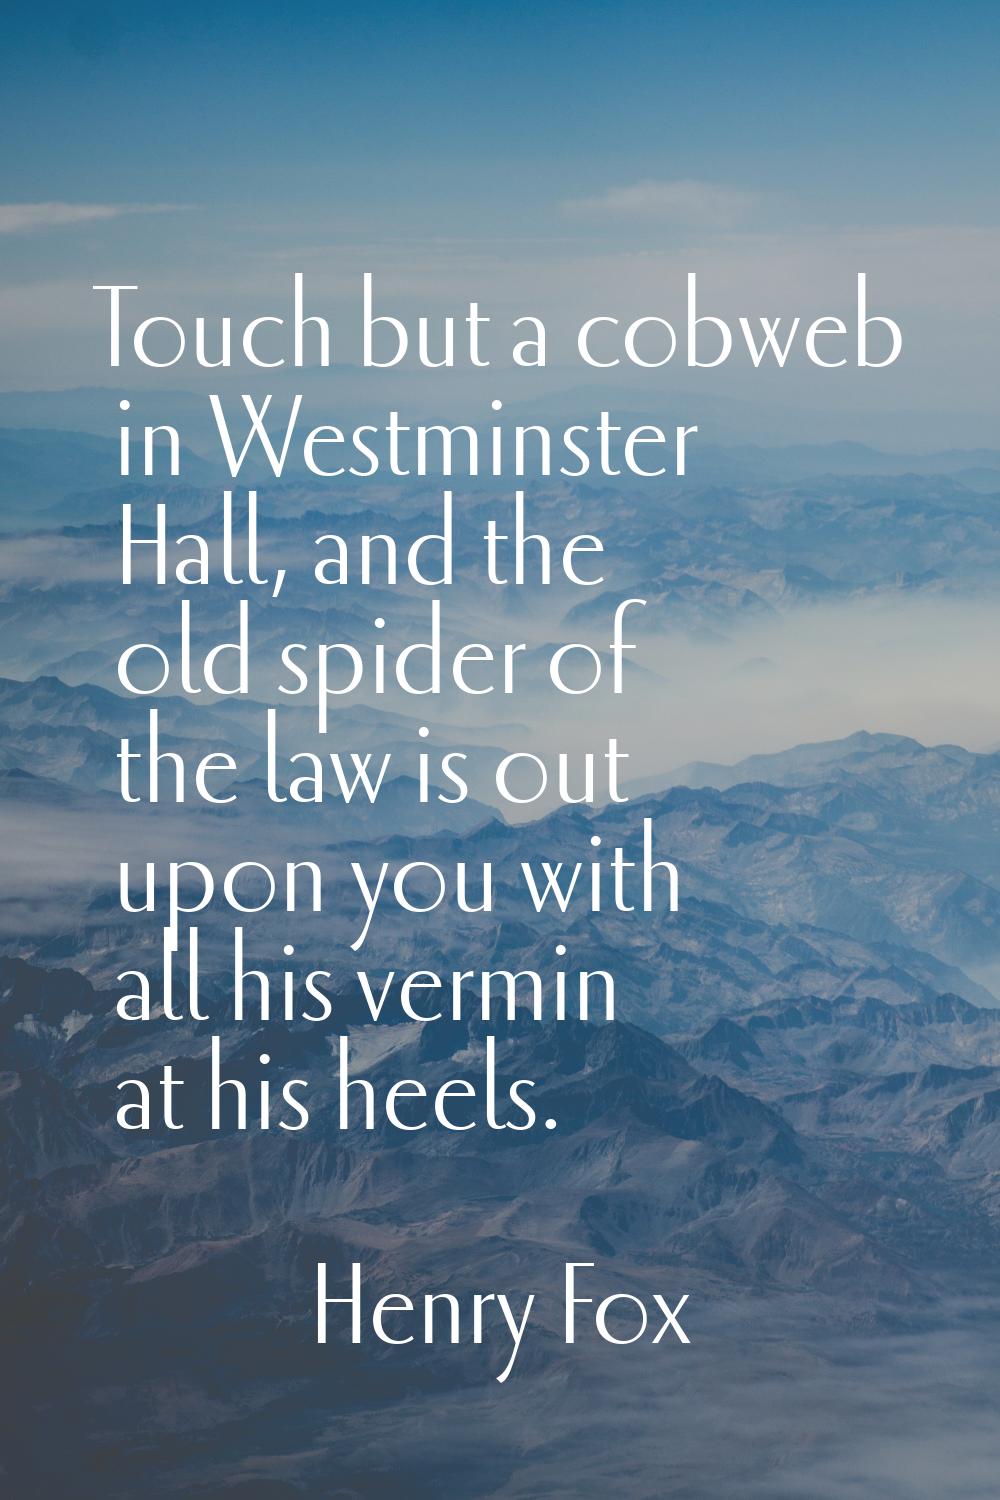 Touch but a cobweb in Westminster Hall, and the old spider of the law is out upon you with all his 